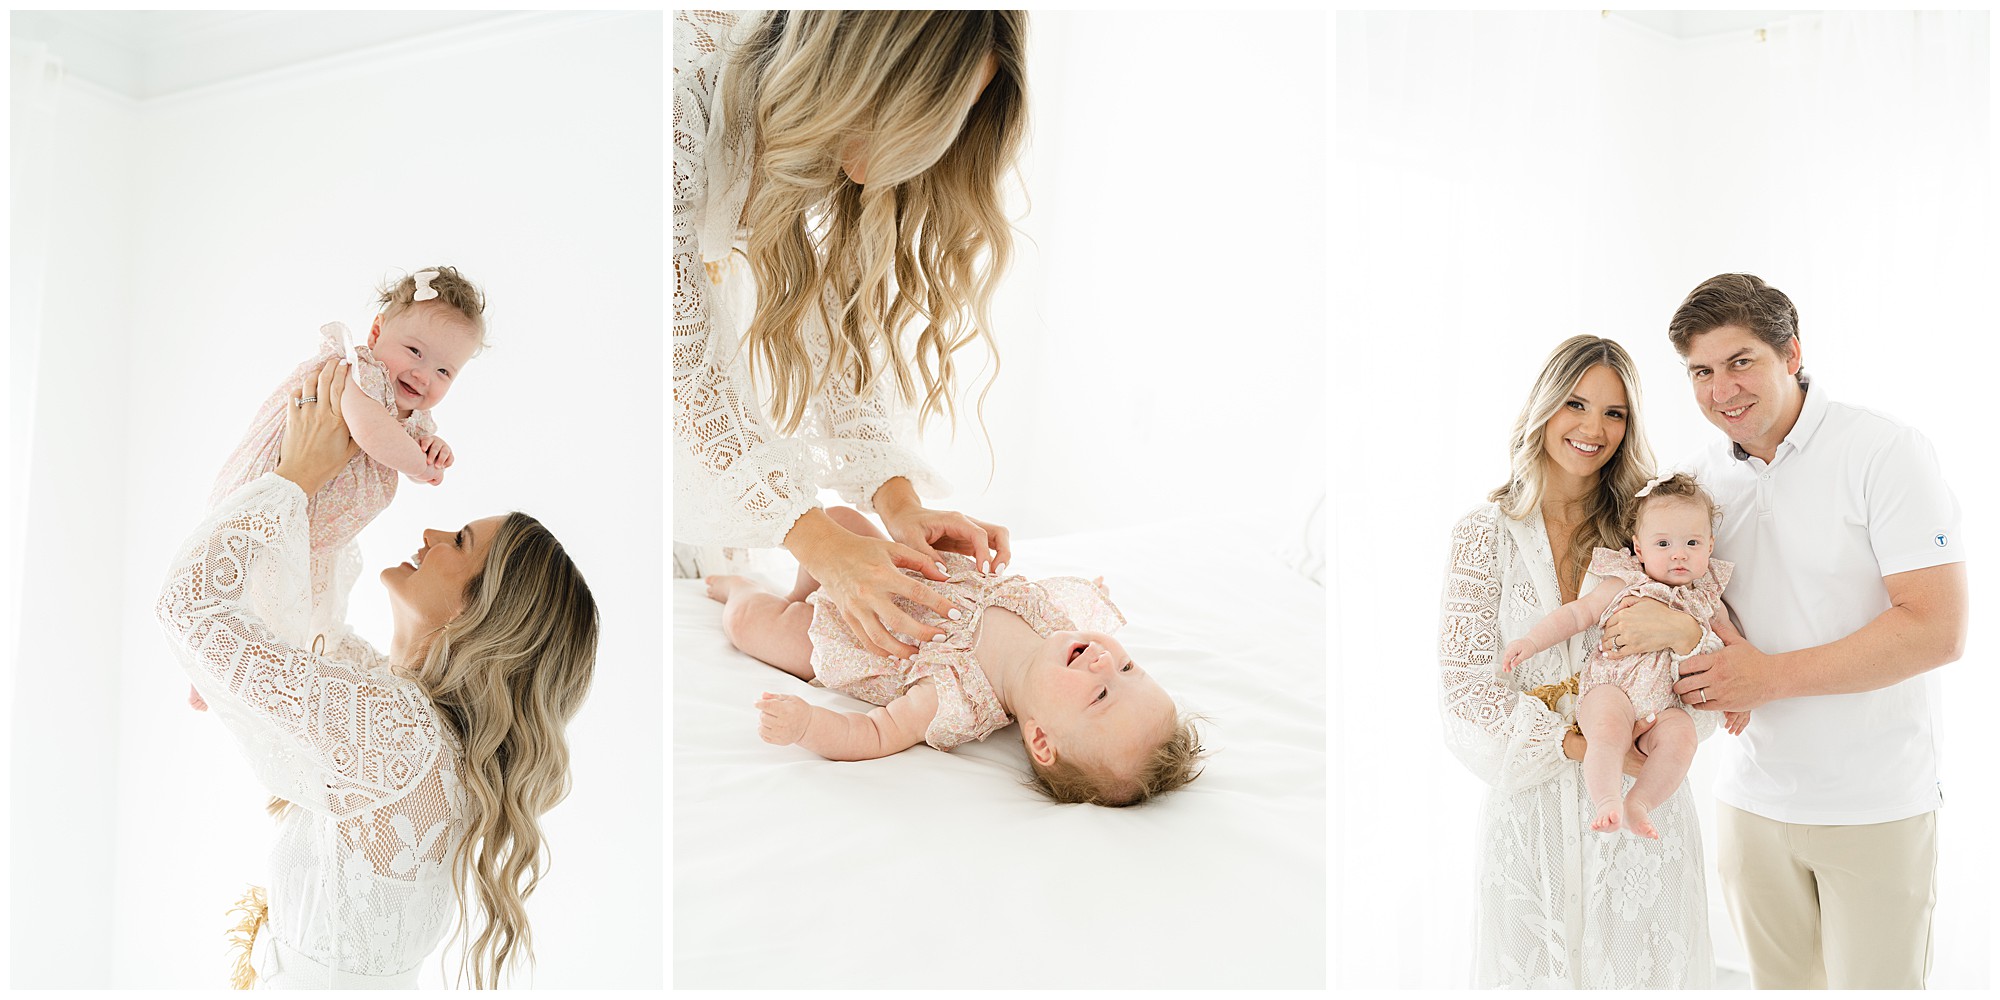 Three photos of a six month old baby with her parents posing for portraits in a white studio for an Atlanta baby photographer.